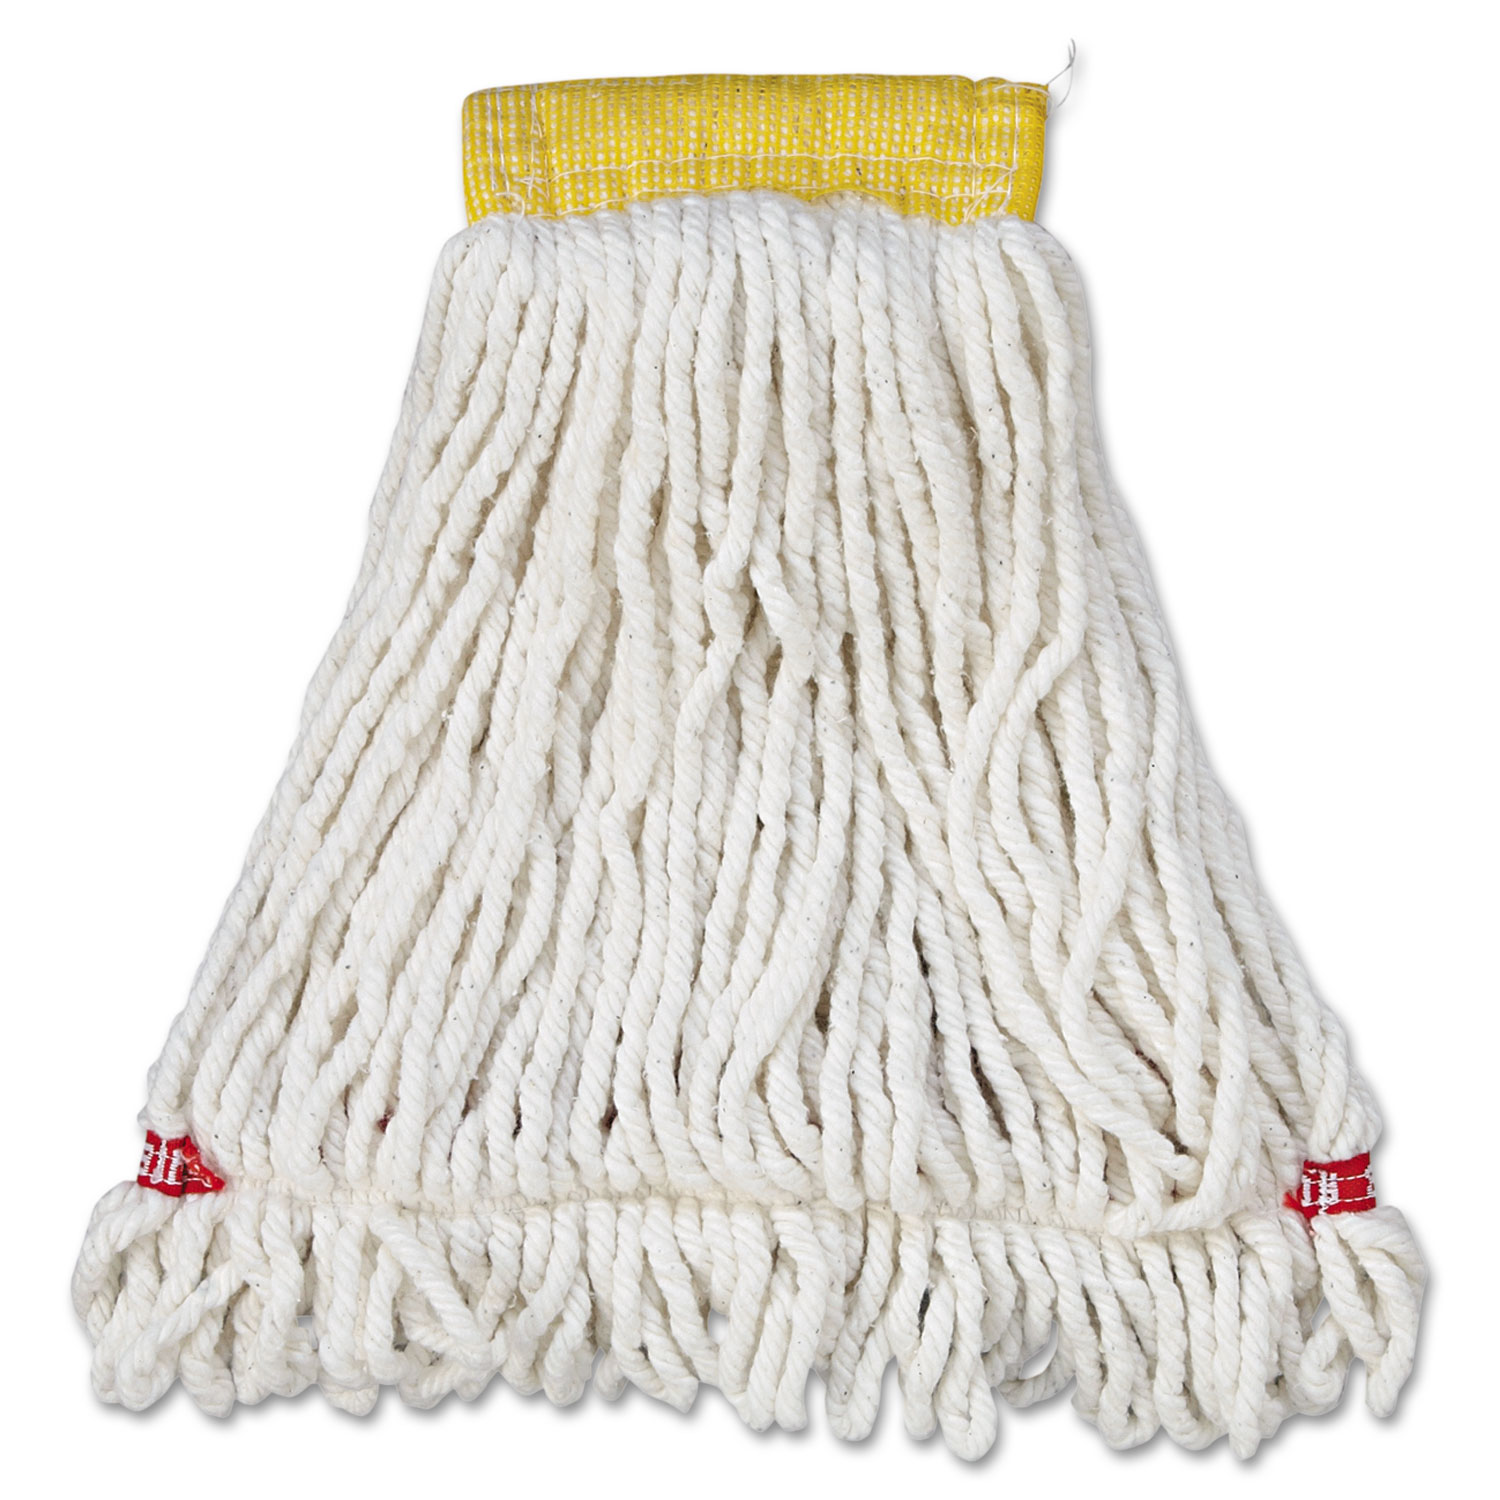  Rubbermaid Commercial FGA25106WH00 Web Foot Wet Mop Head, Shrinkless, Cotton/Synthetic, White, Small, 6/Carton (RCPA251WHI) 